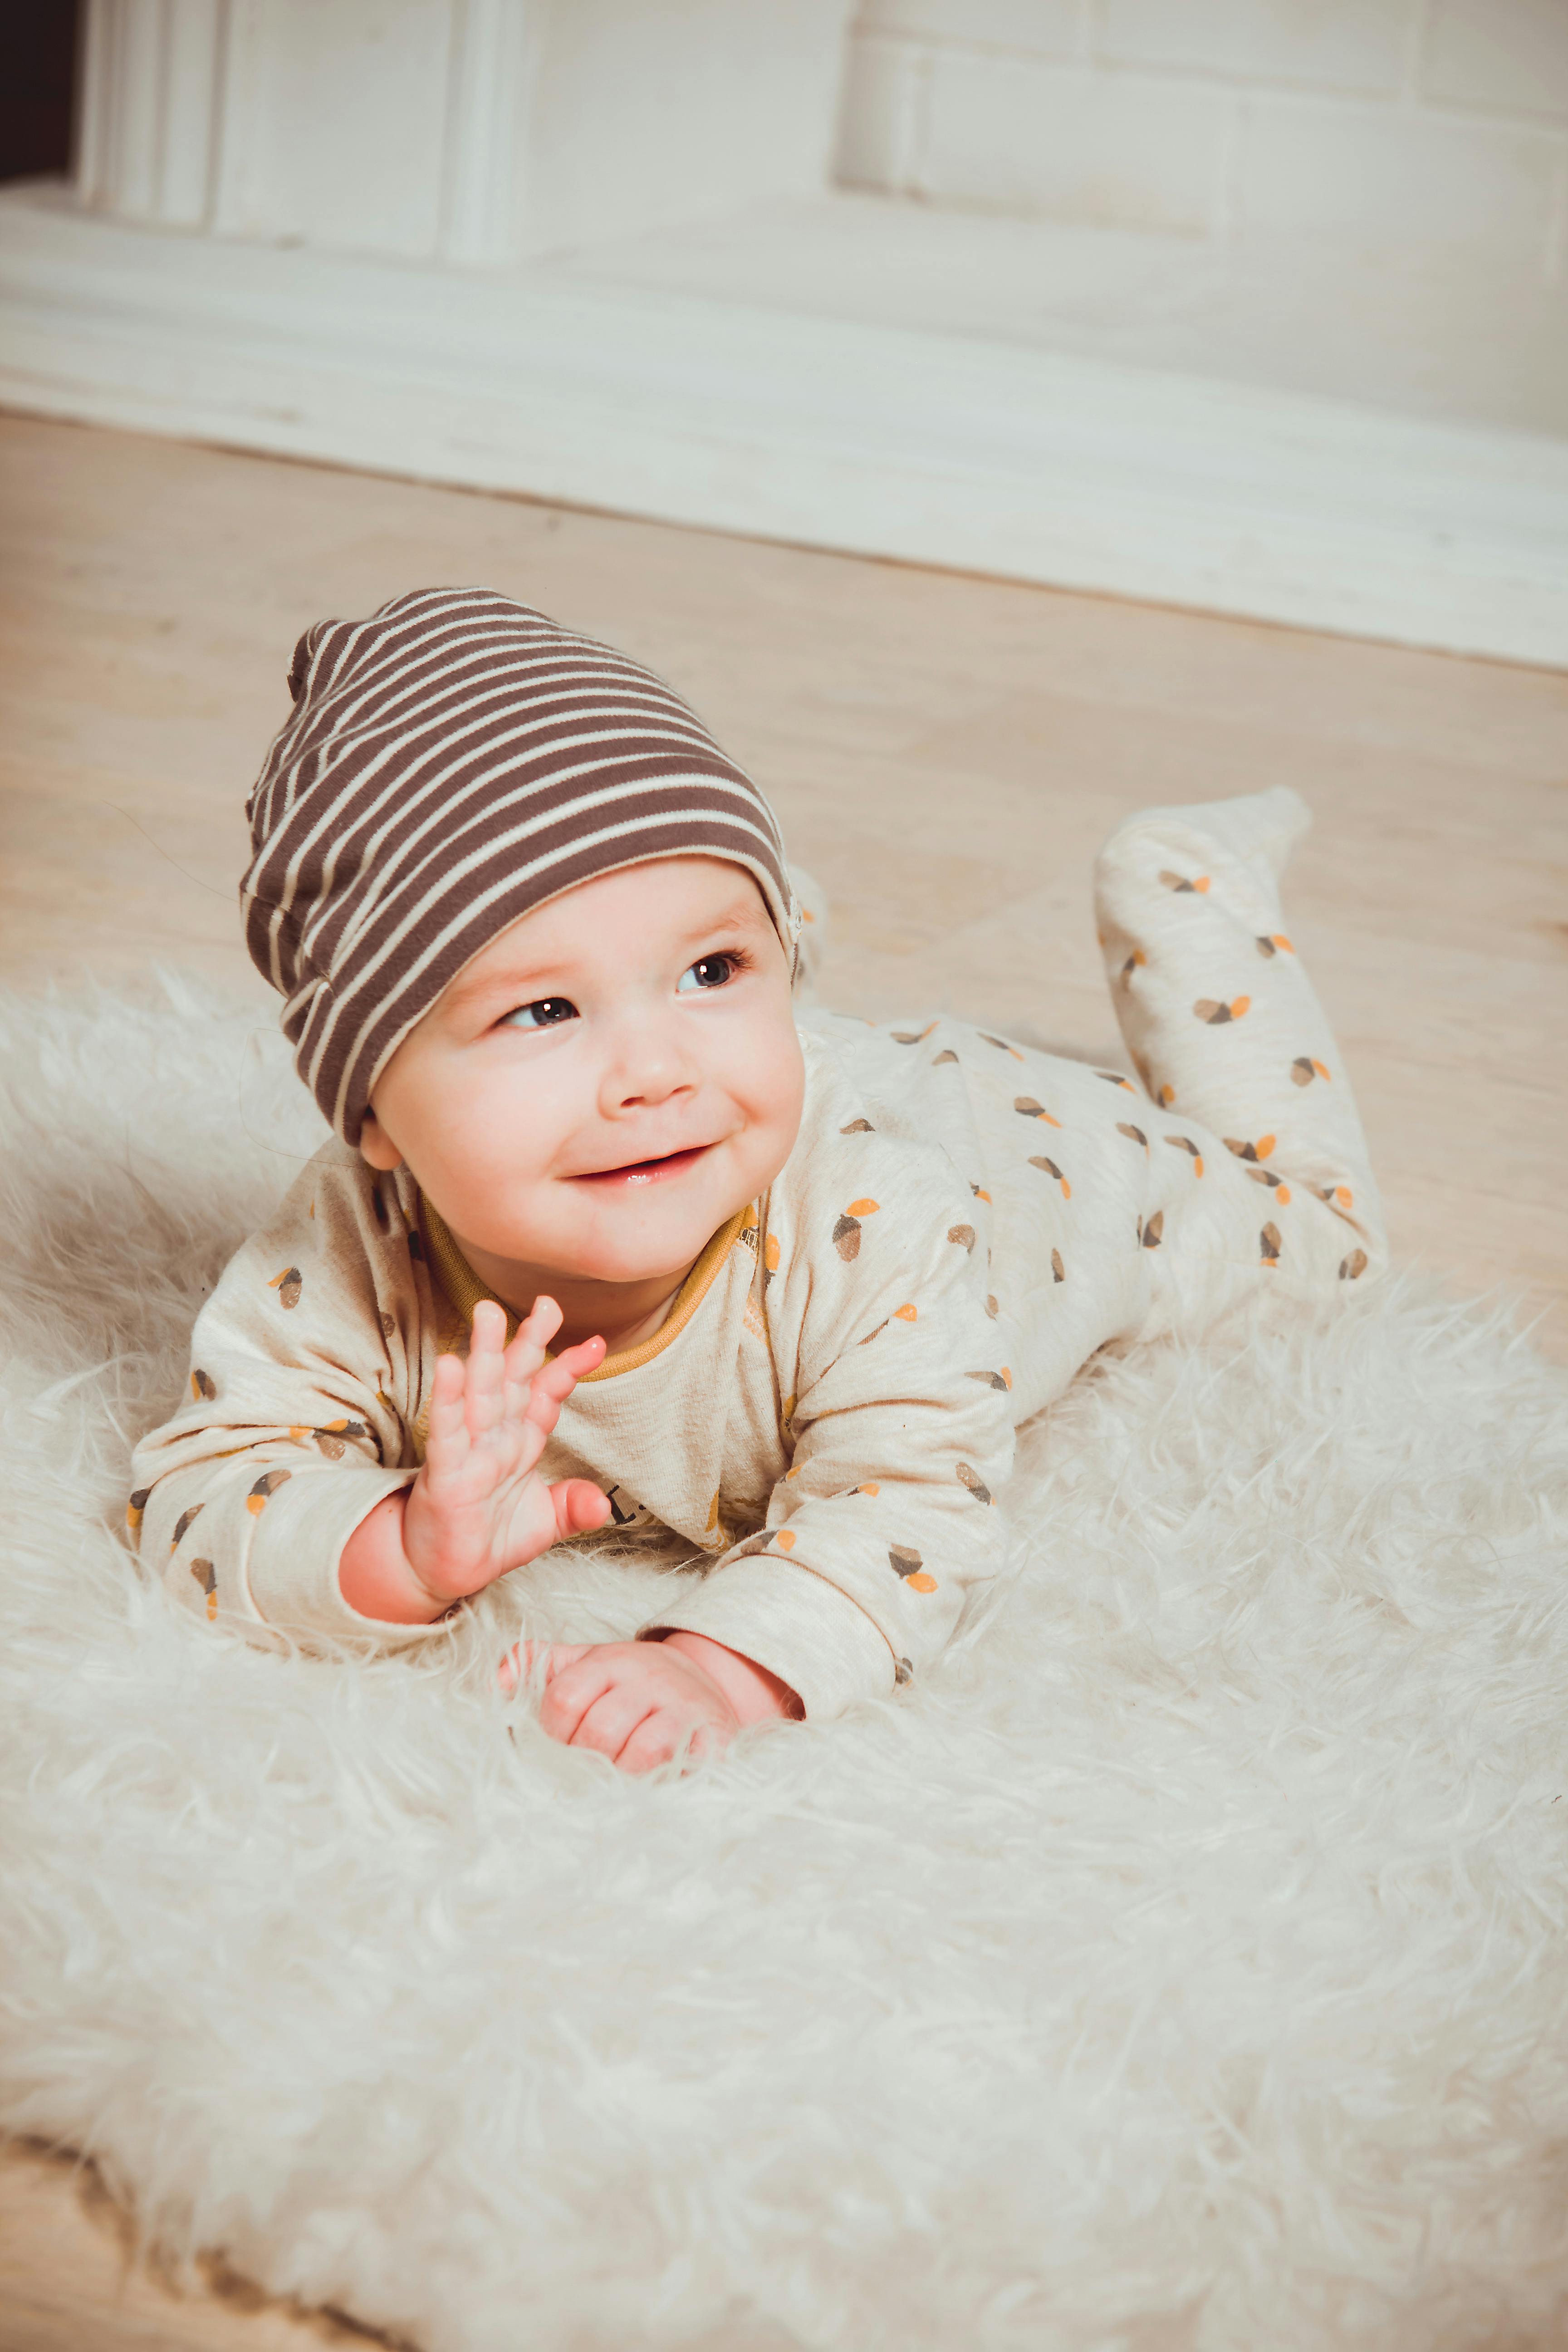 Baby phone Stock Photos, Royalty Free Baby phone Images